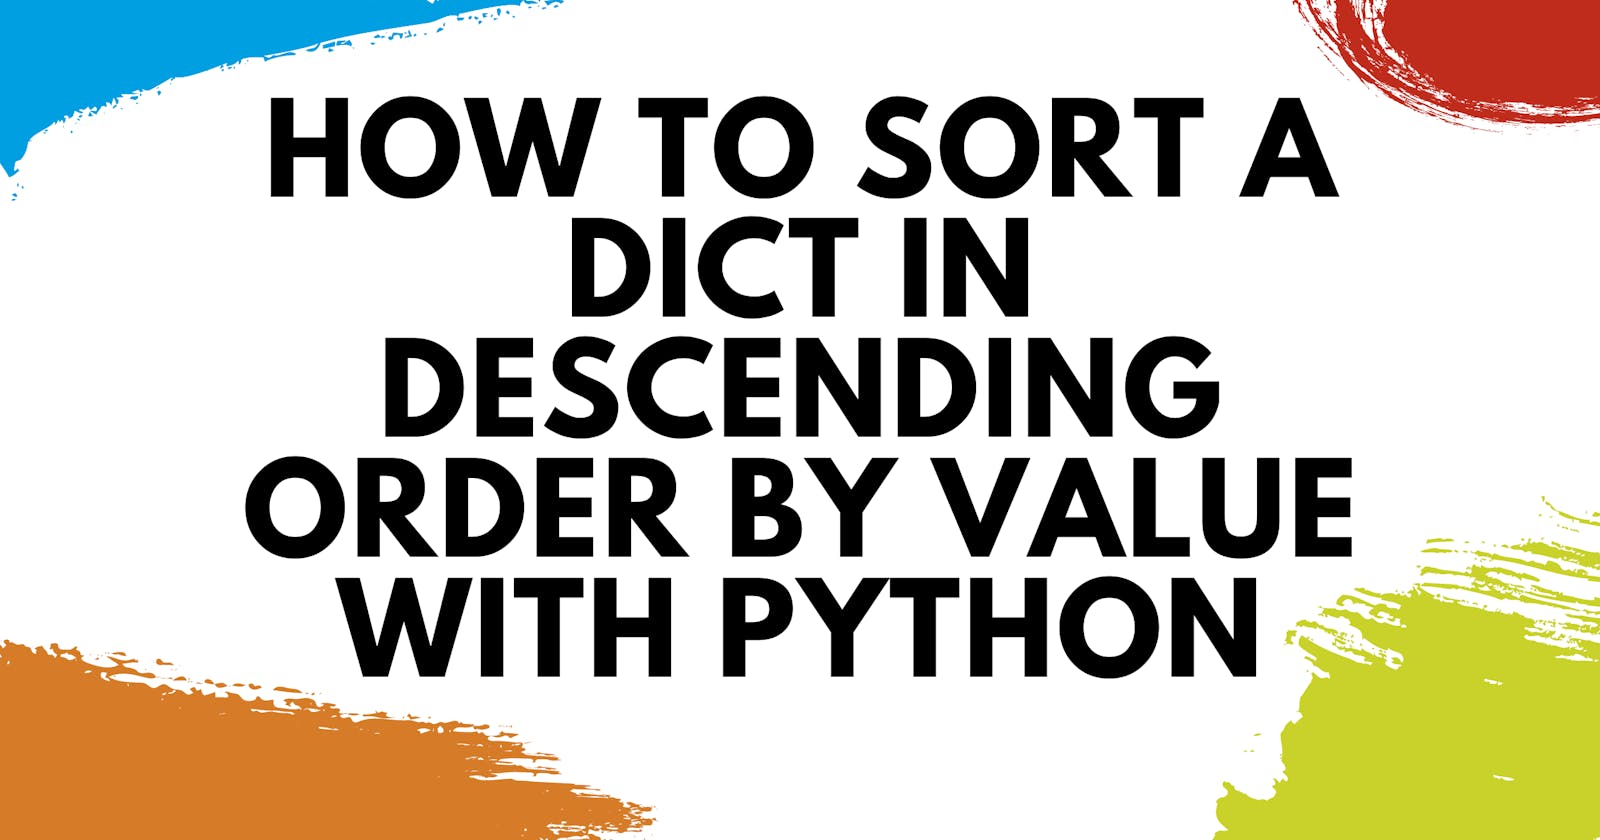 How to Sort a Dict in Descending Order by Value With Python